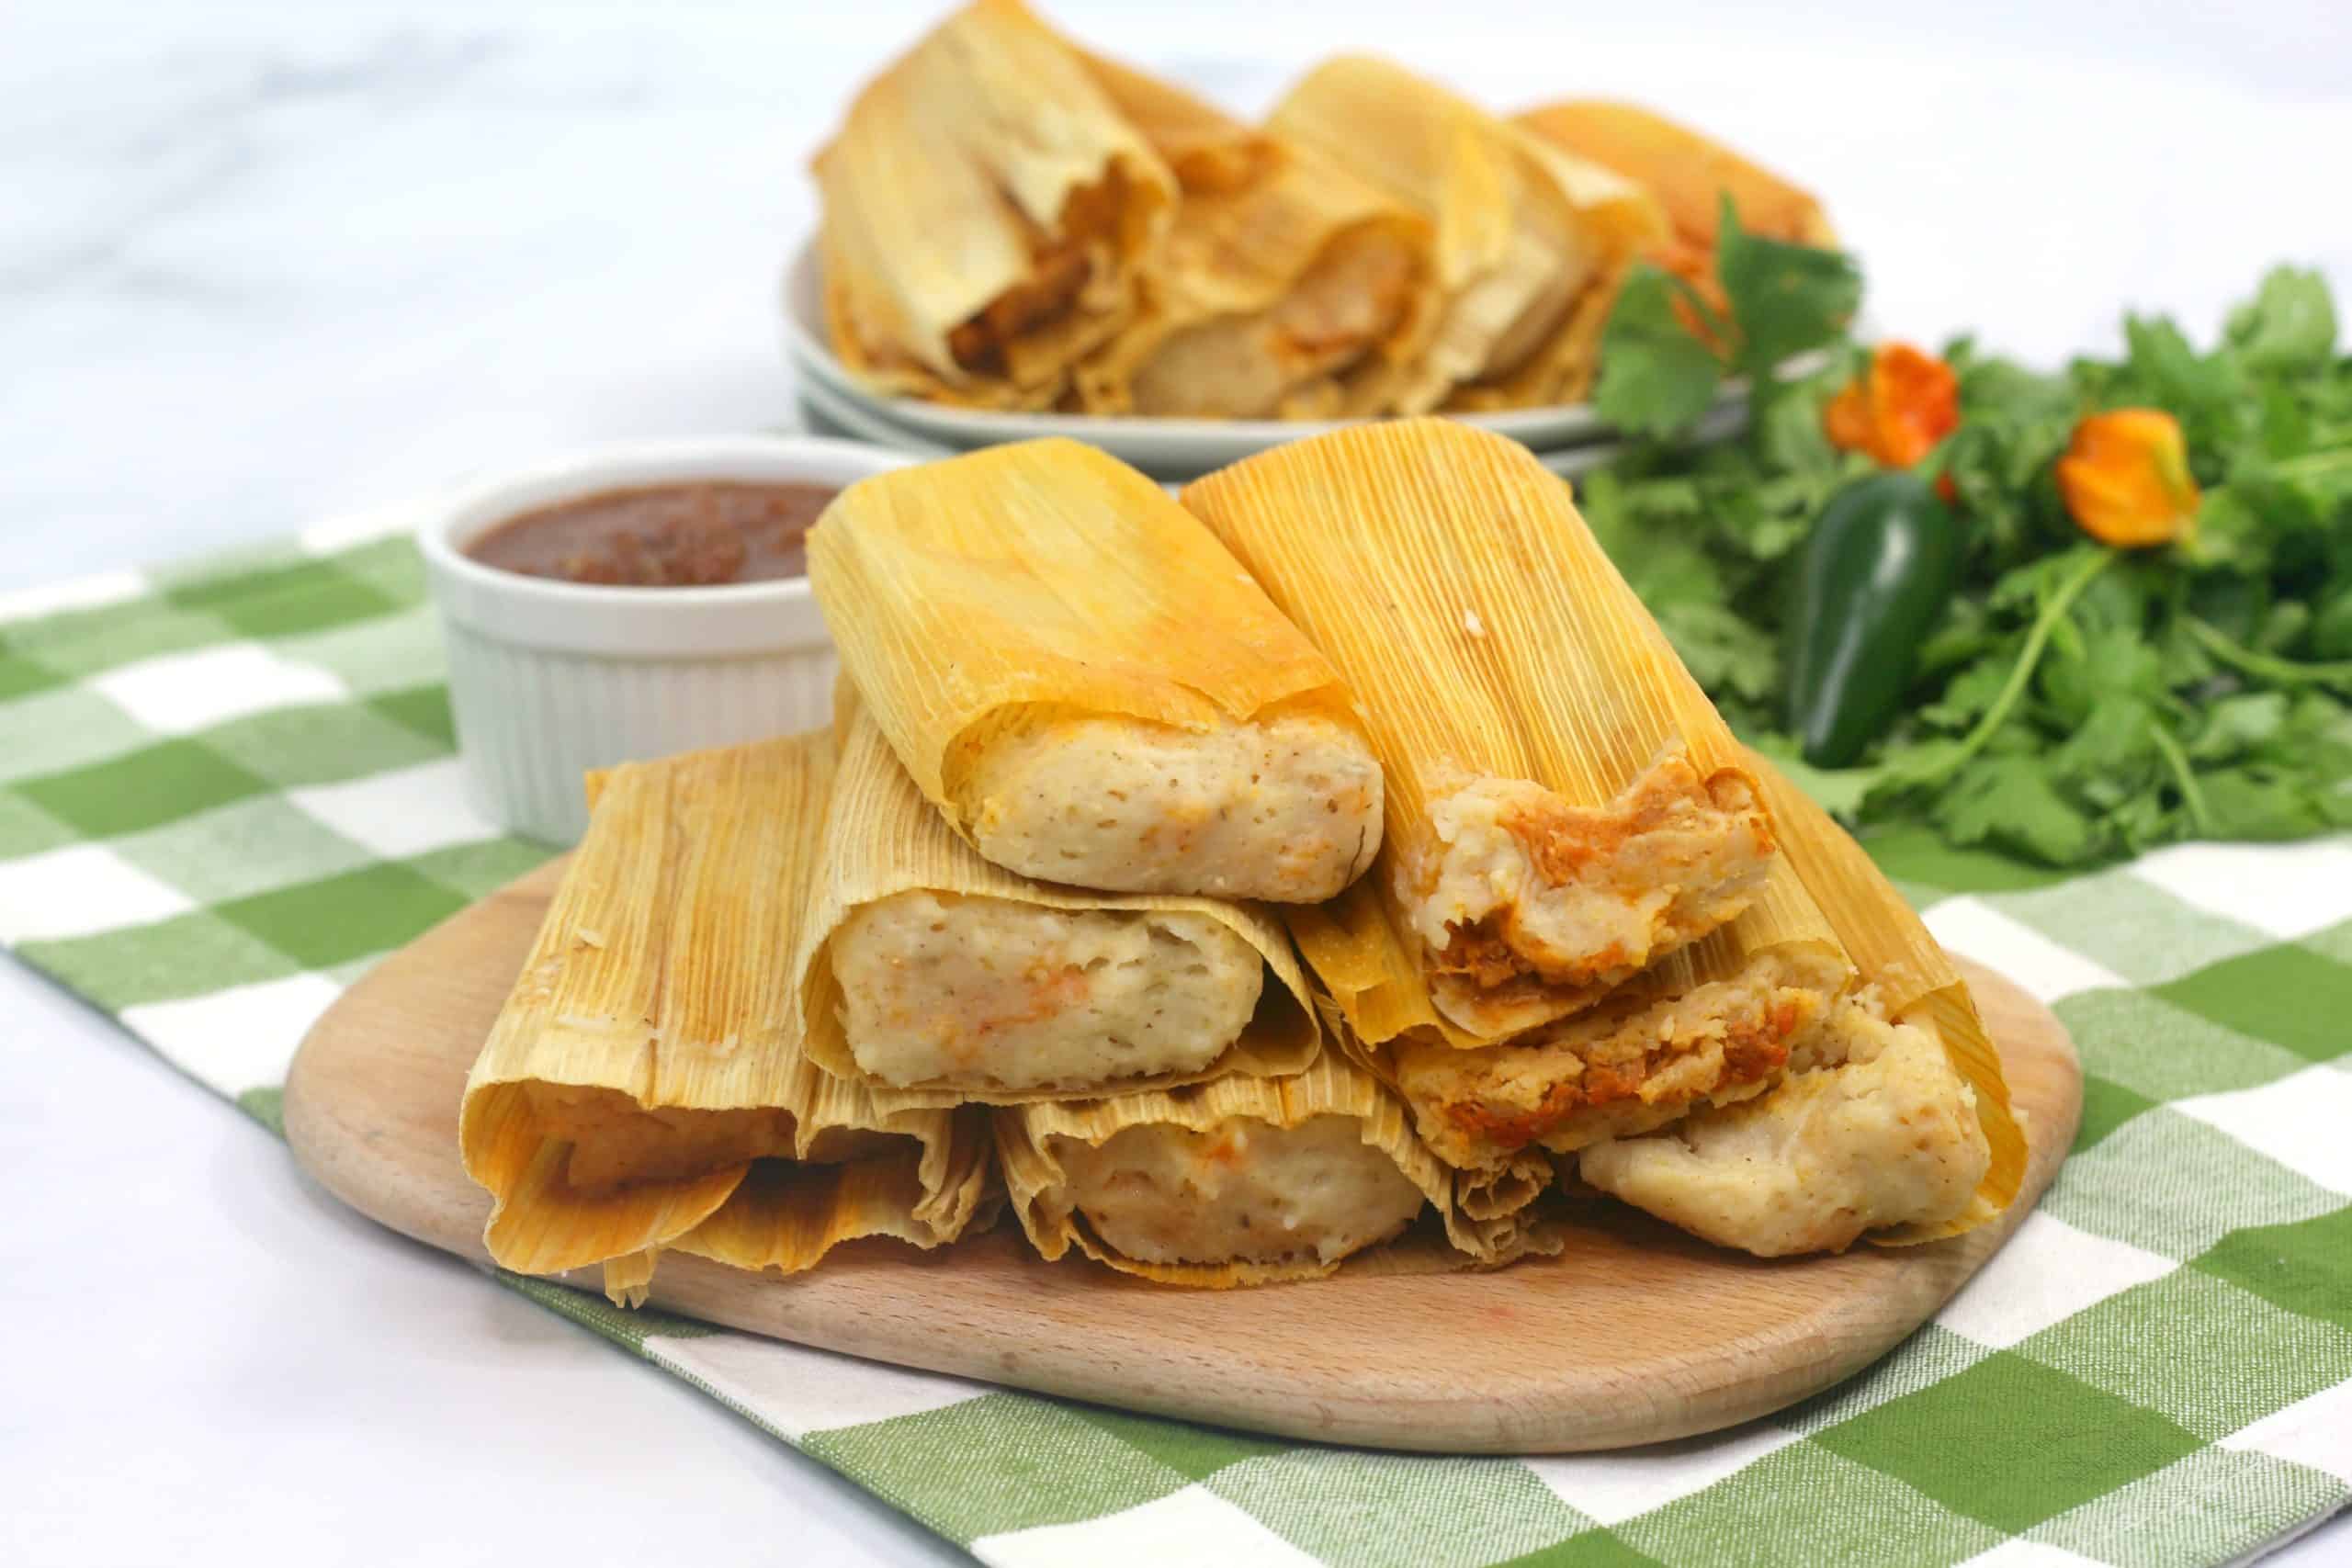 How to make pork tamales in your Instant Pot